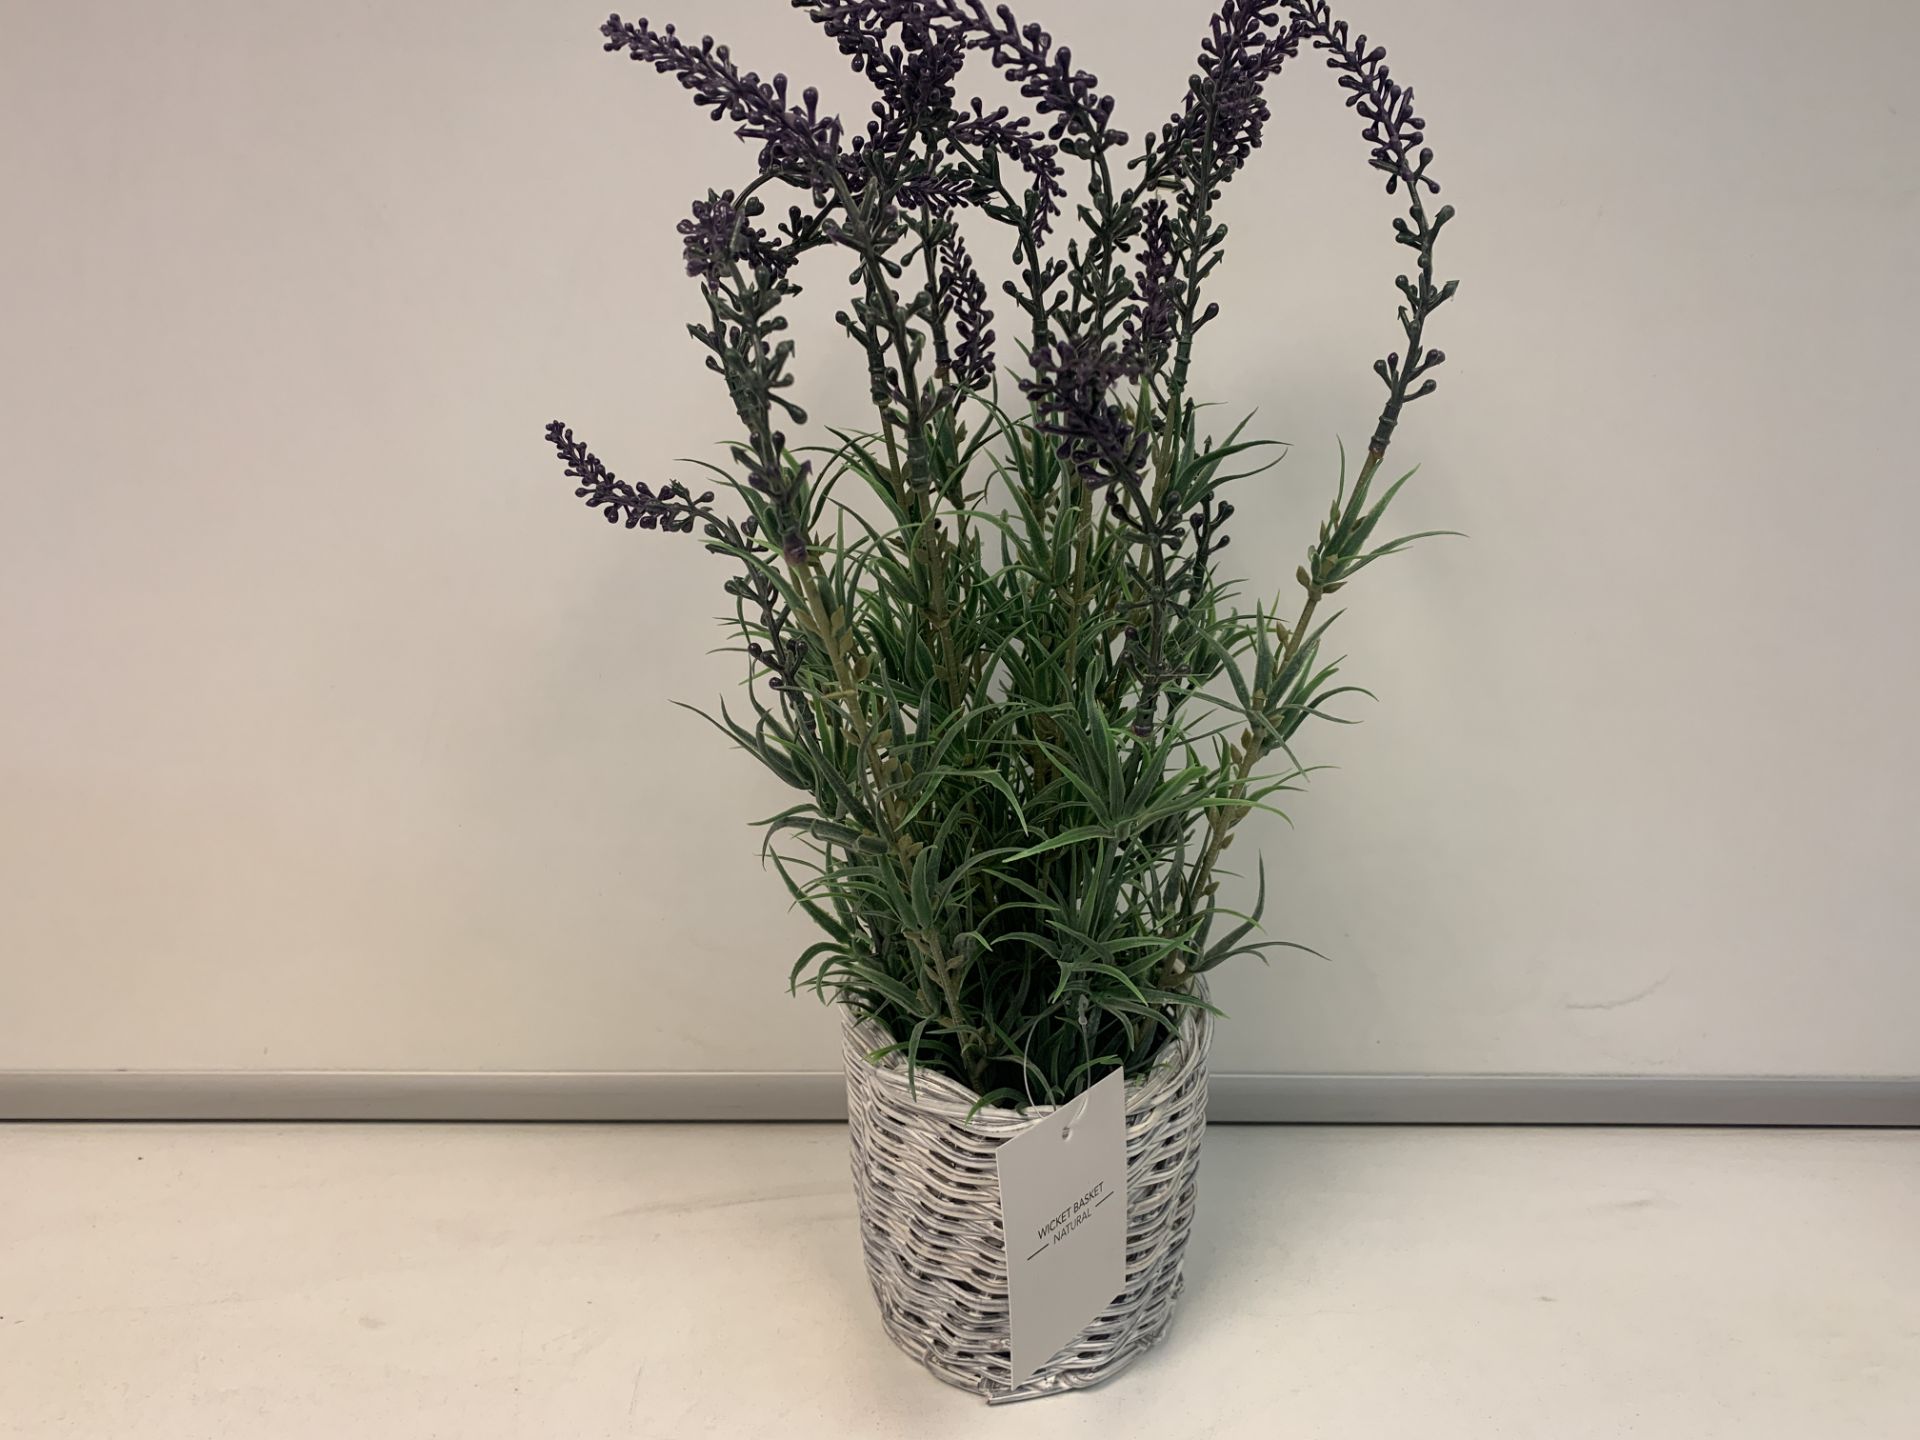 10 X BRAND NEW WICKER BASKETS WITH LAVENDER 38CM RRP £14 EACH R19